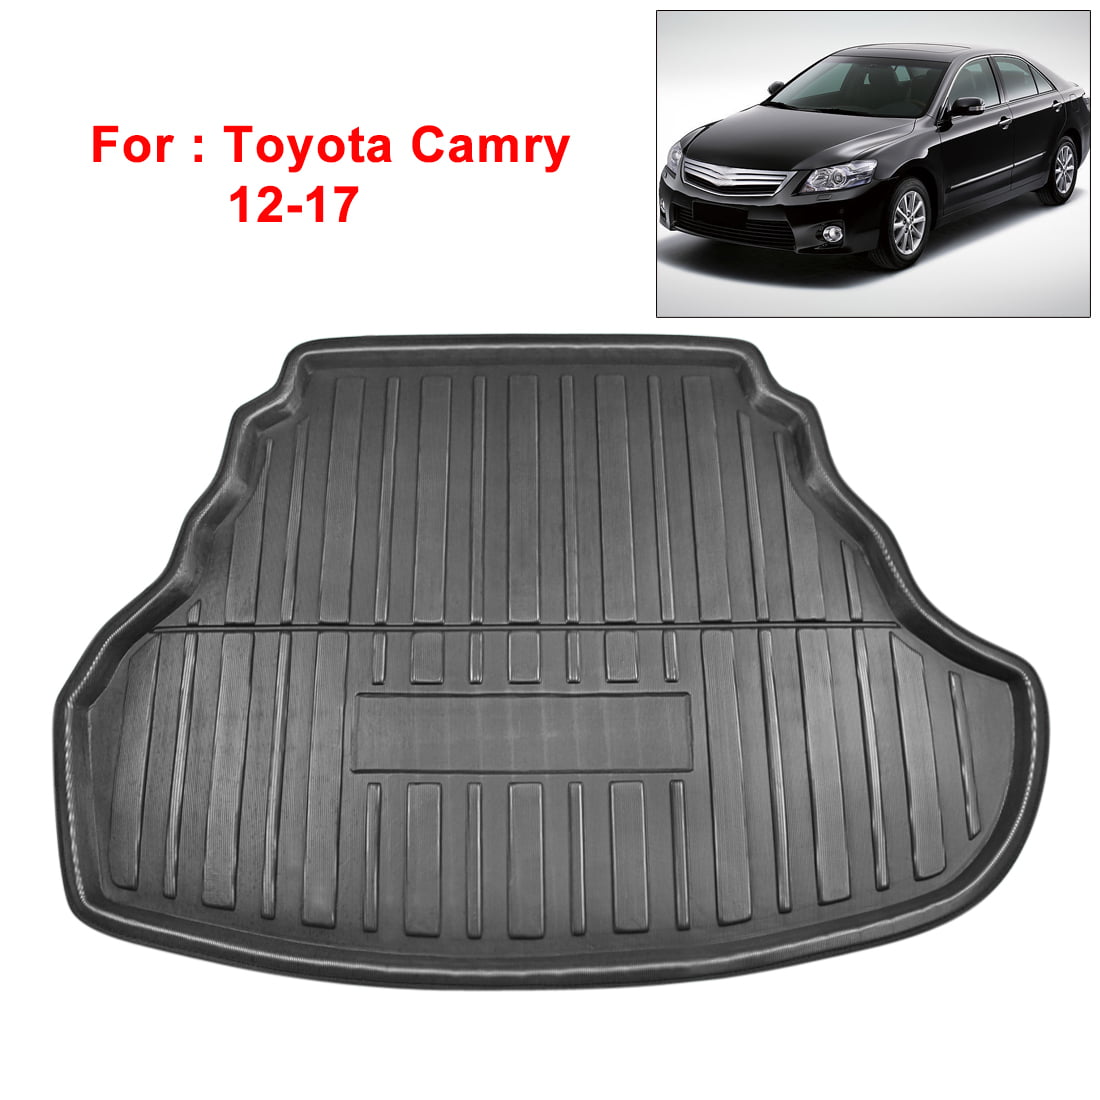 Fit For Toyota Camry 2013-2017 Car Rear Cargo Boot Trunk Mat Tray Pad Protector